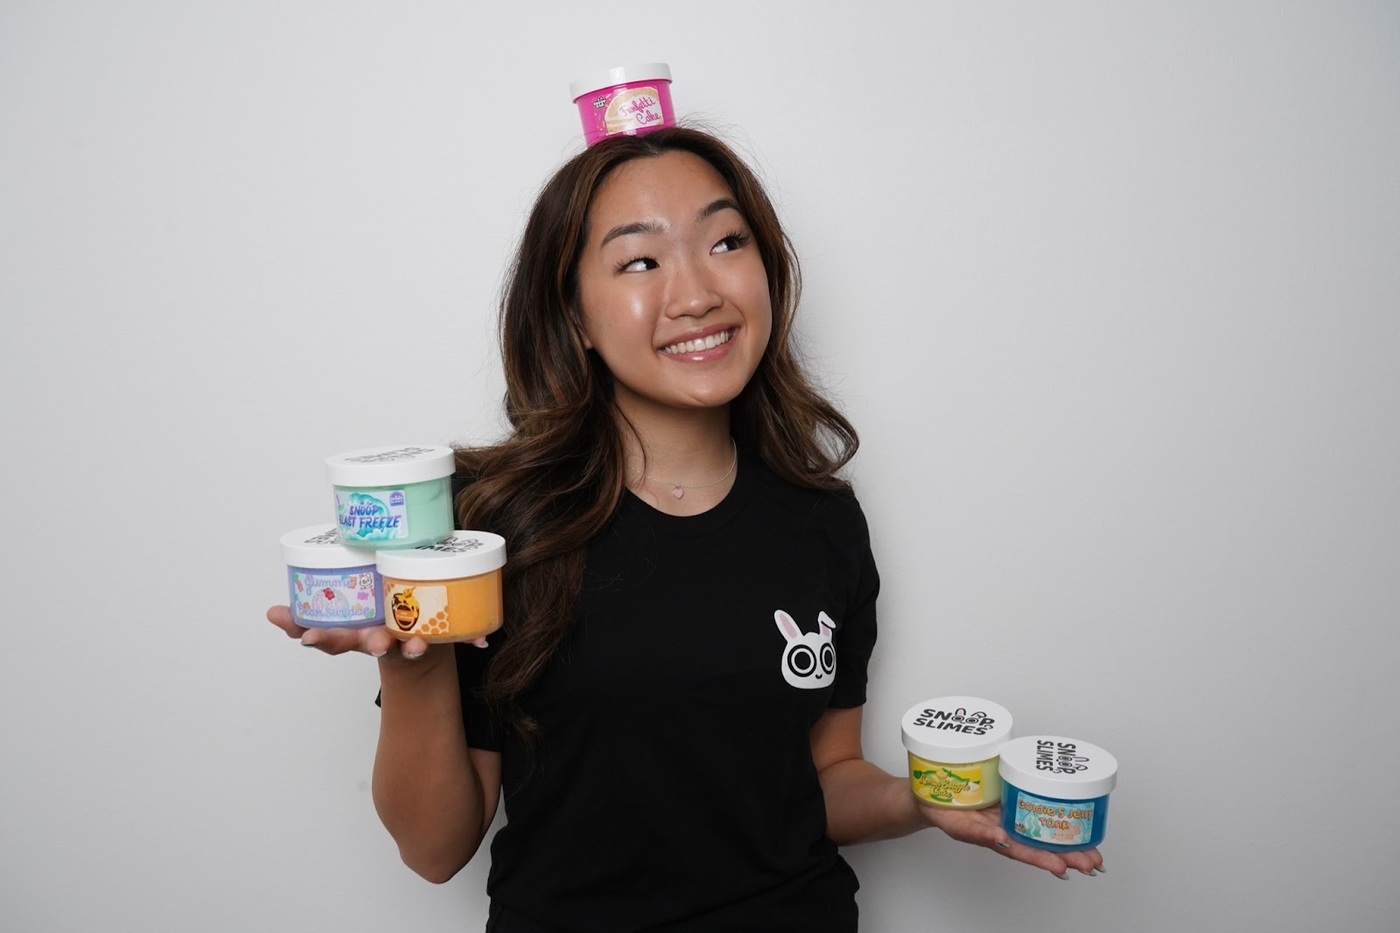 Headshot of Jungmin Kang with several containers of SnoopSlimes products